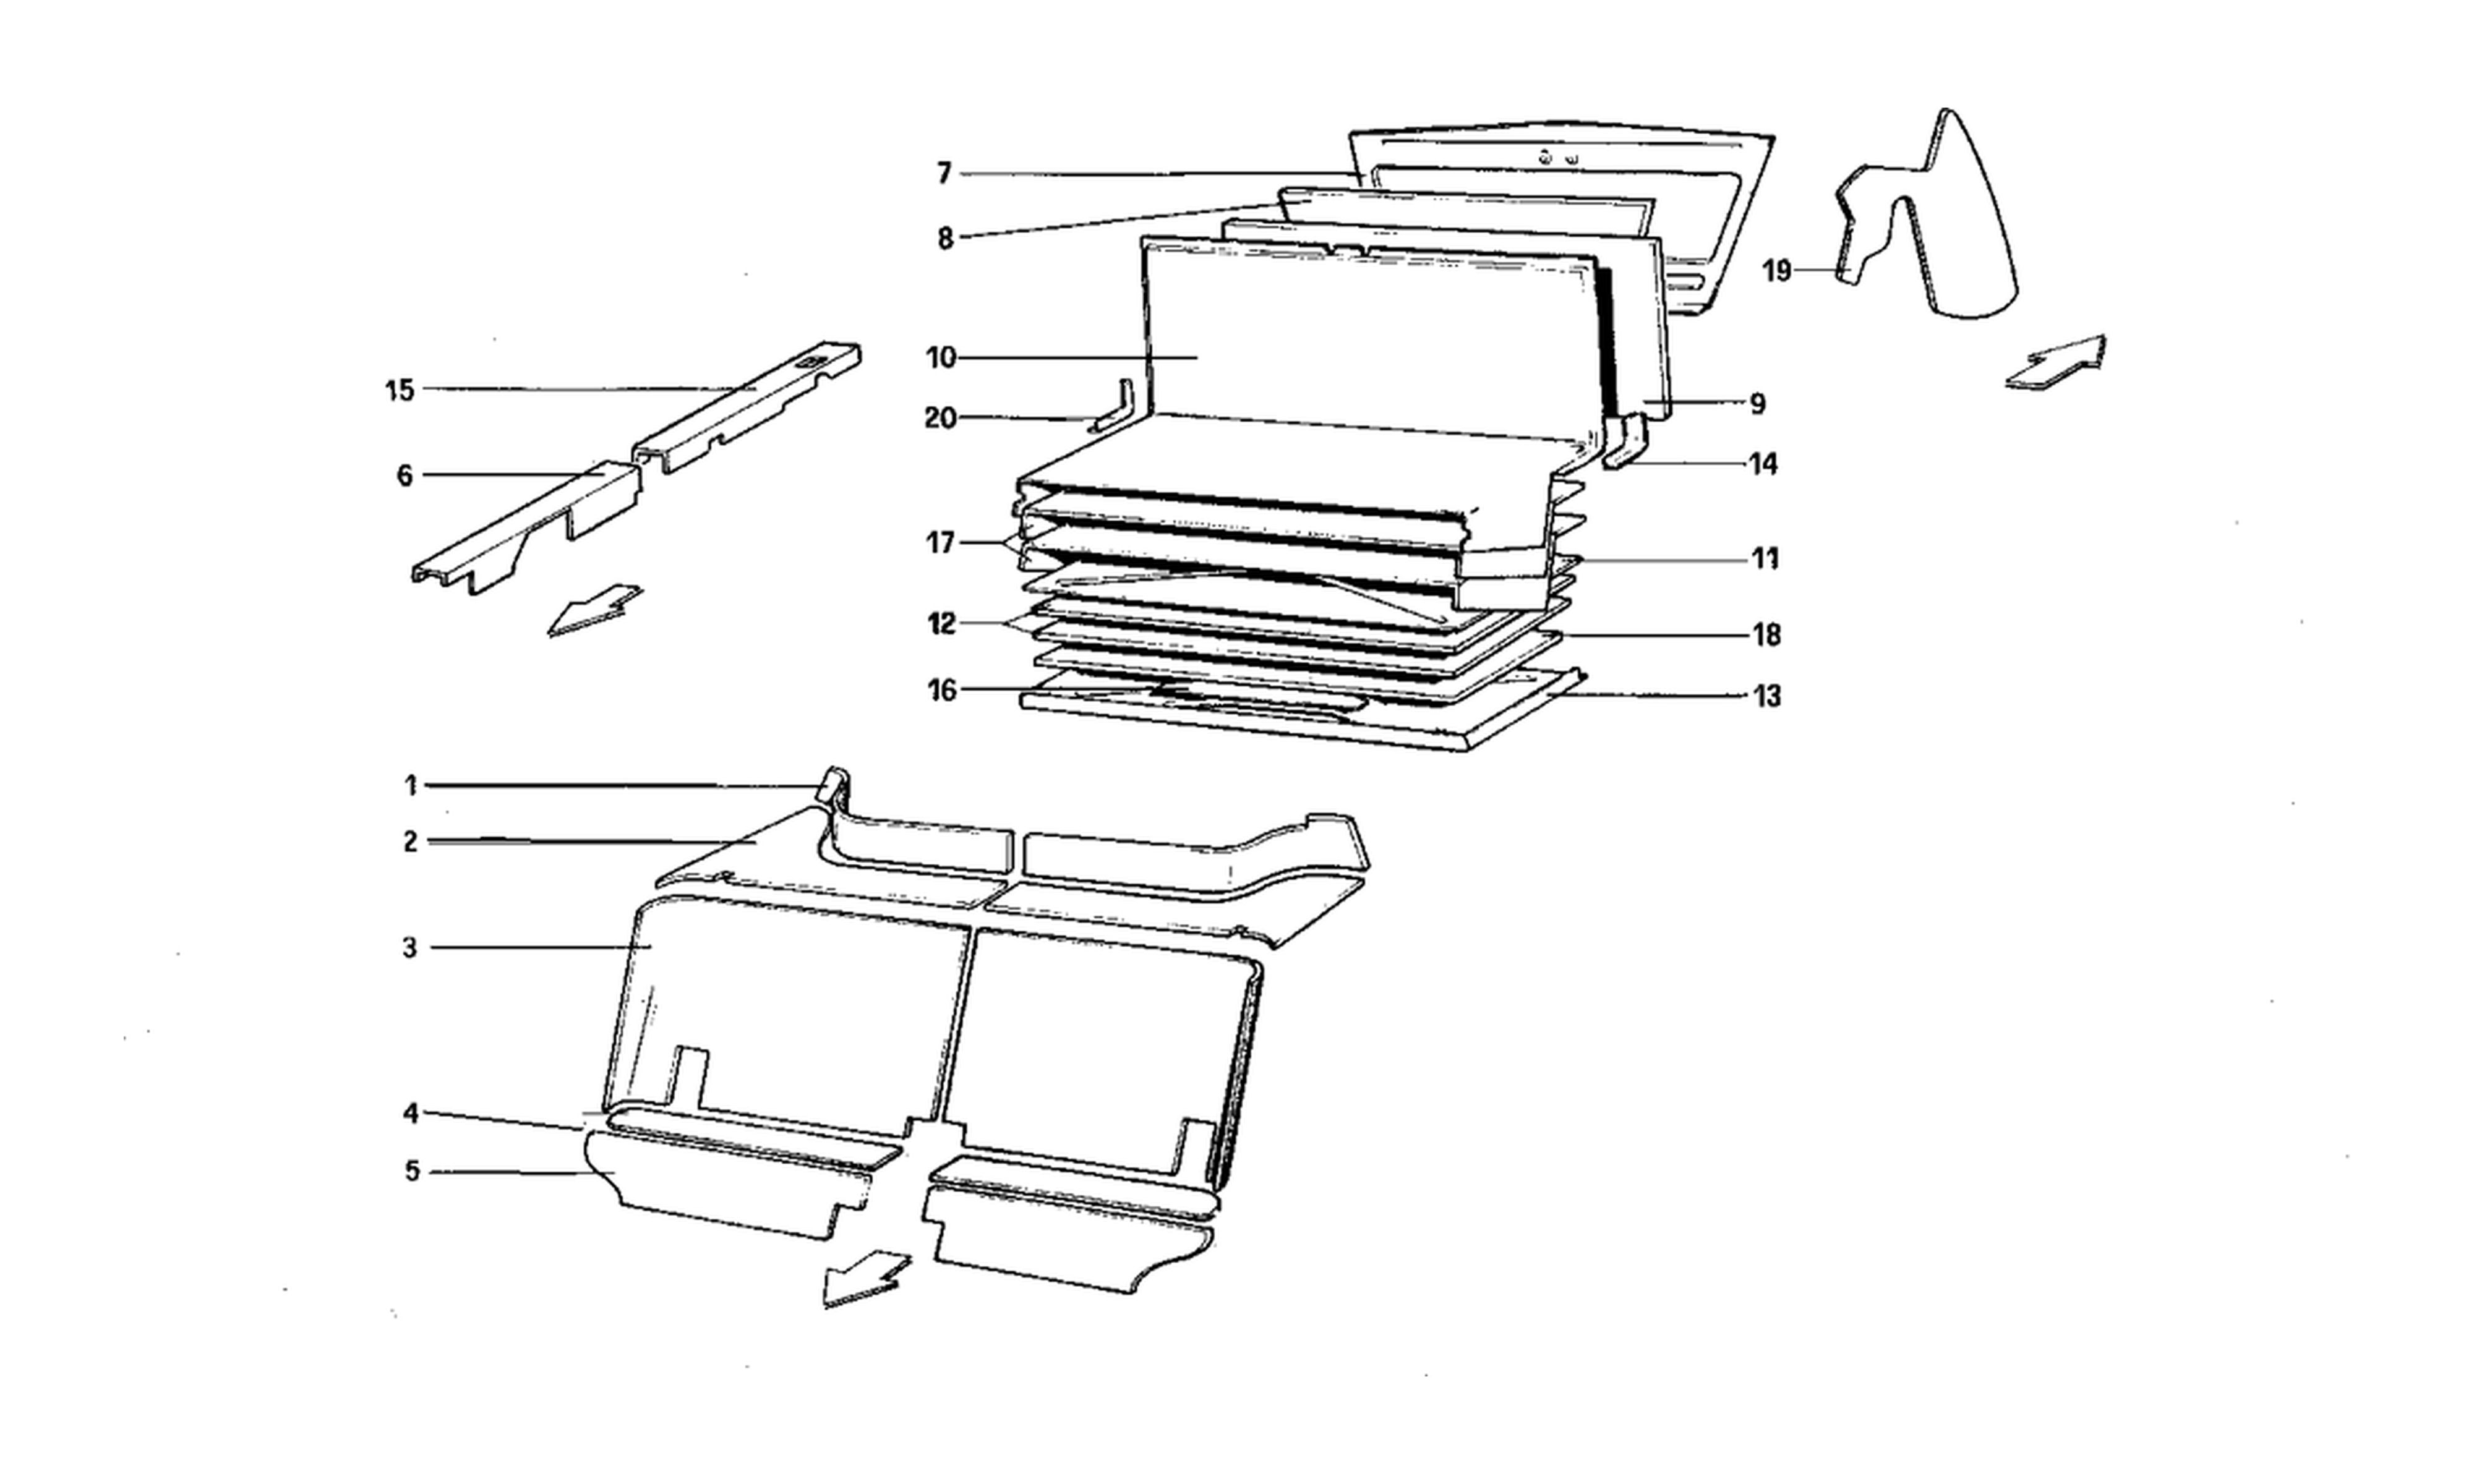 Schematic: Passenger And Luggage Compartments Insulation